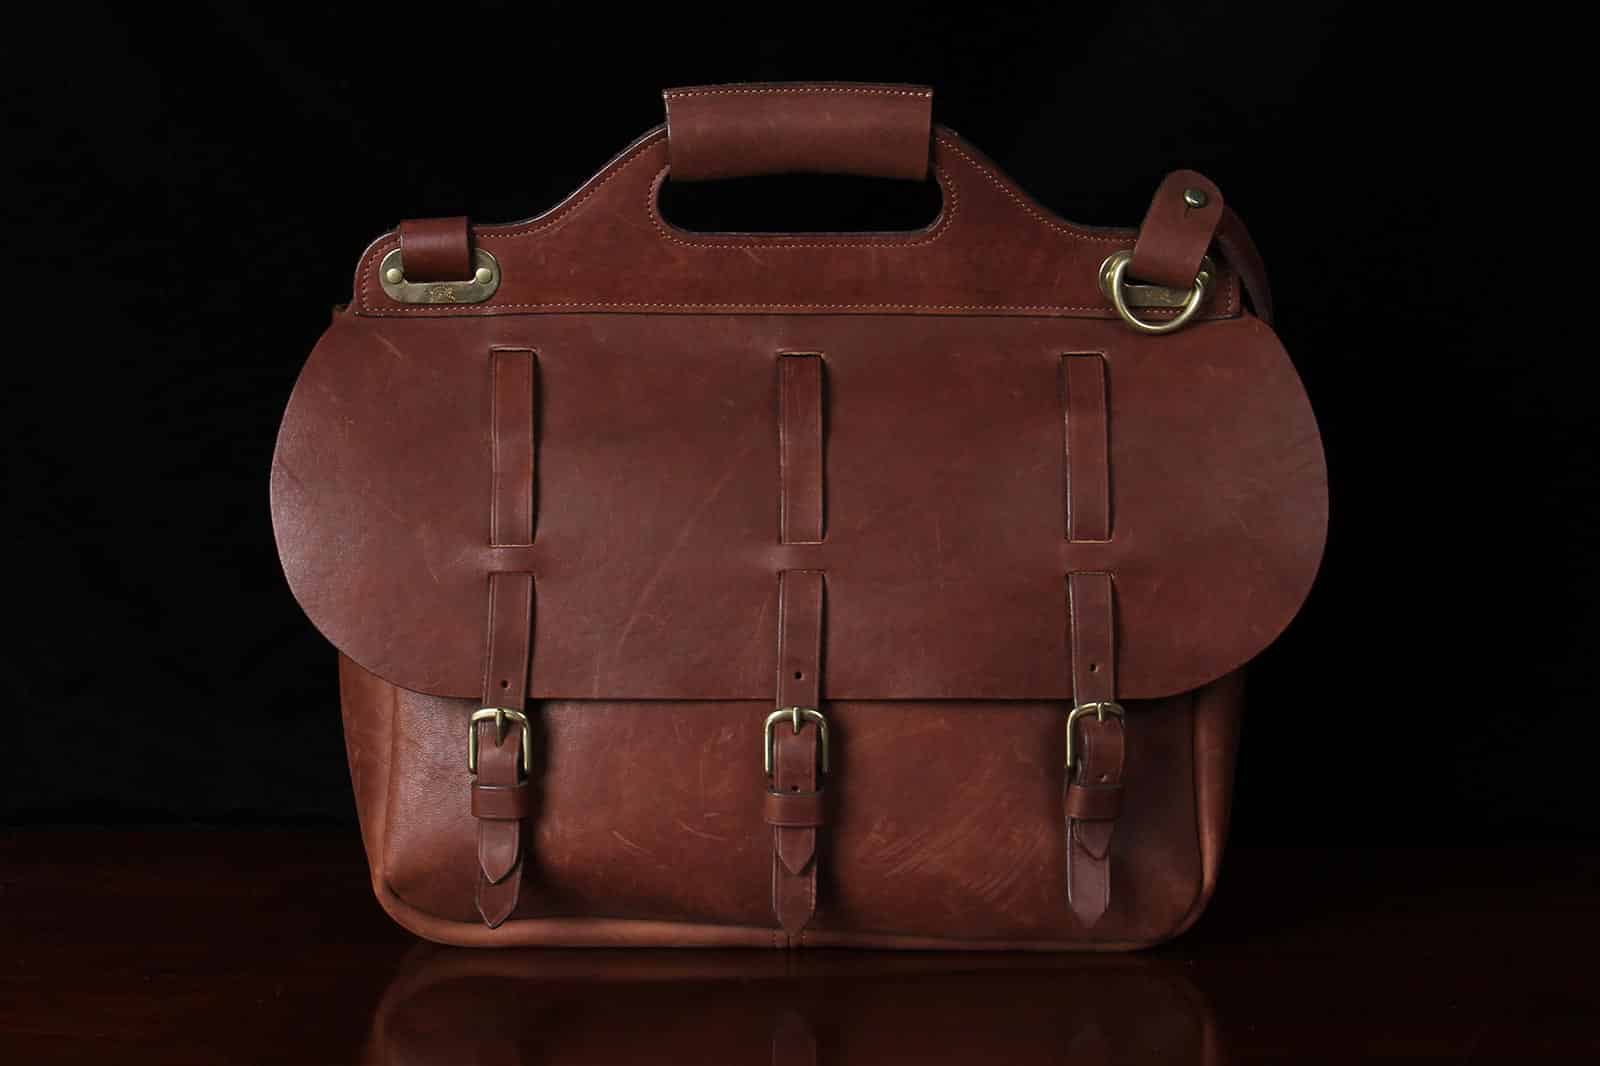 No. 1 Saddlebag Briefcase in Vintage Brown American Steerhide Leather - front view - leather dry and scuffed